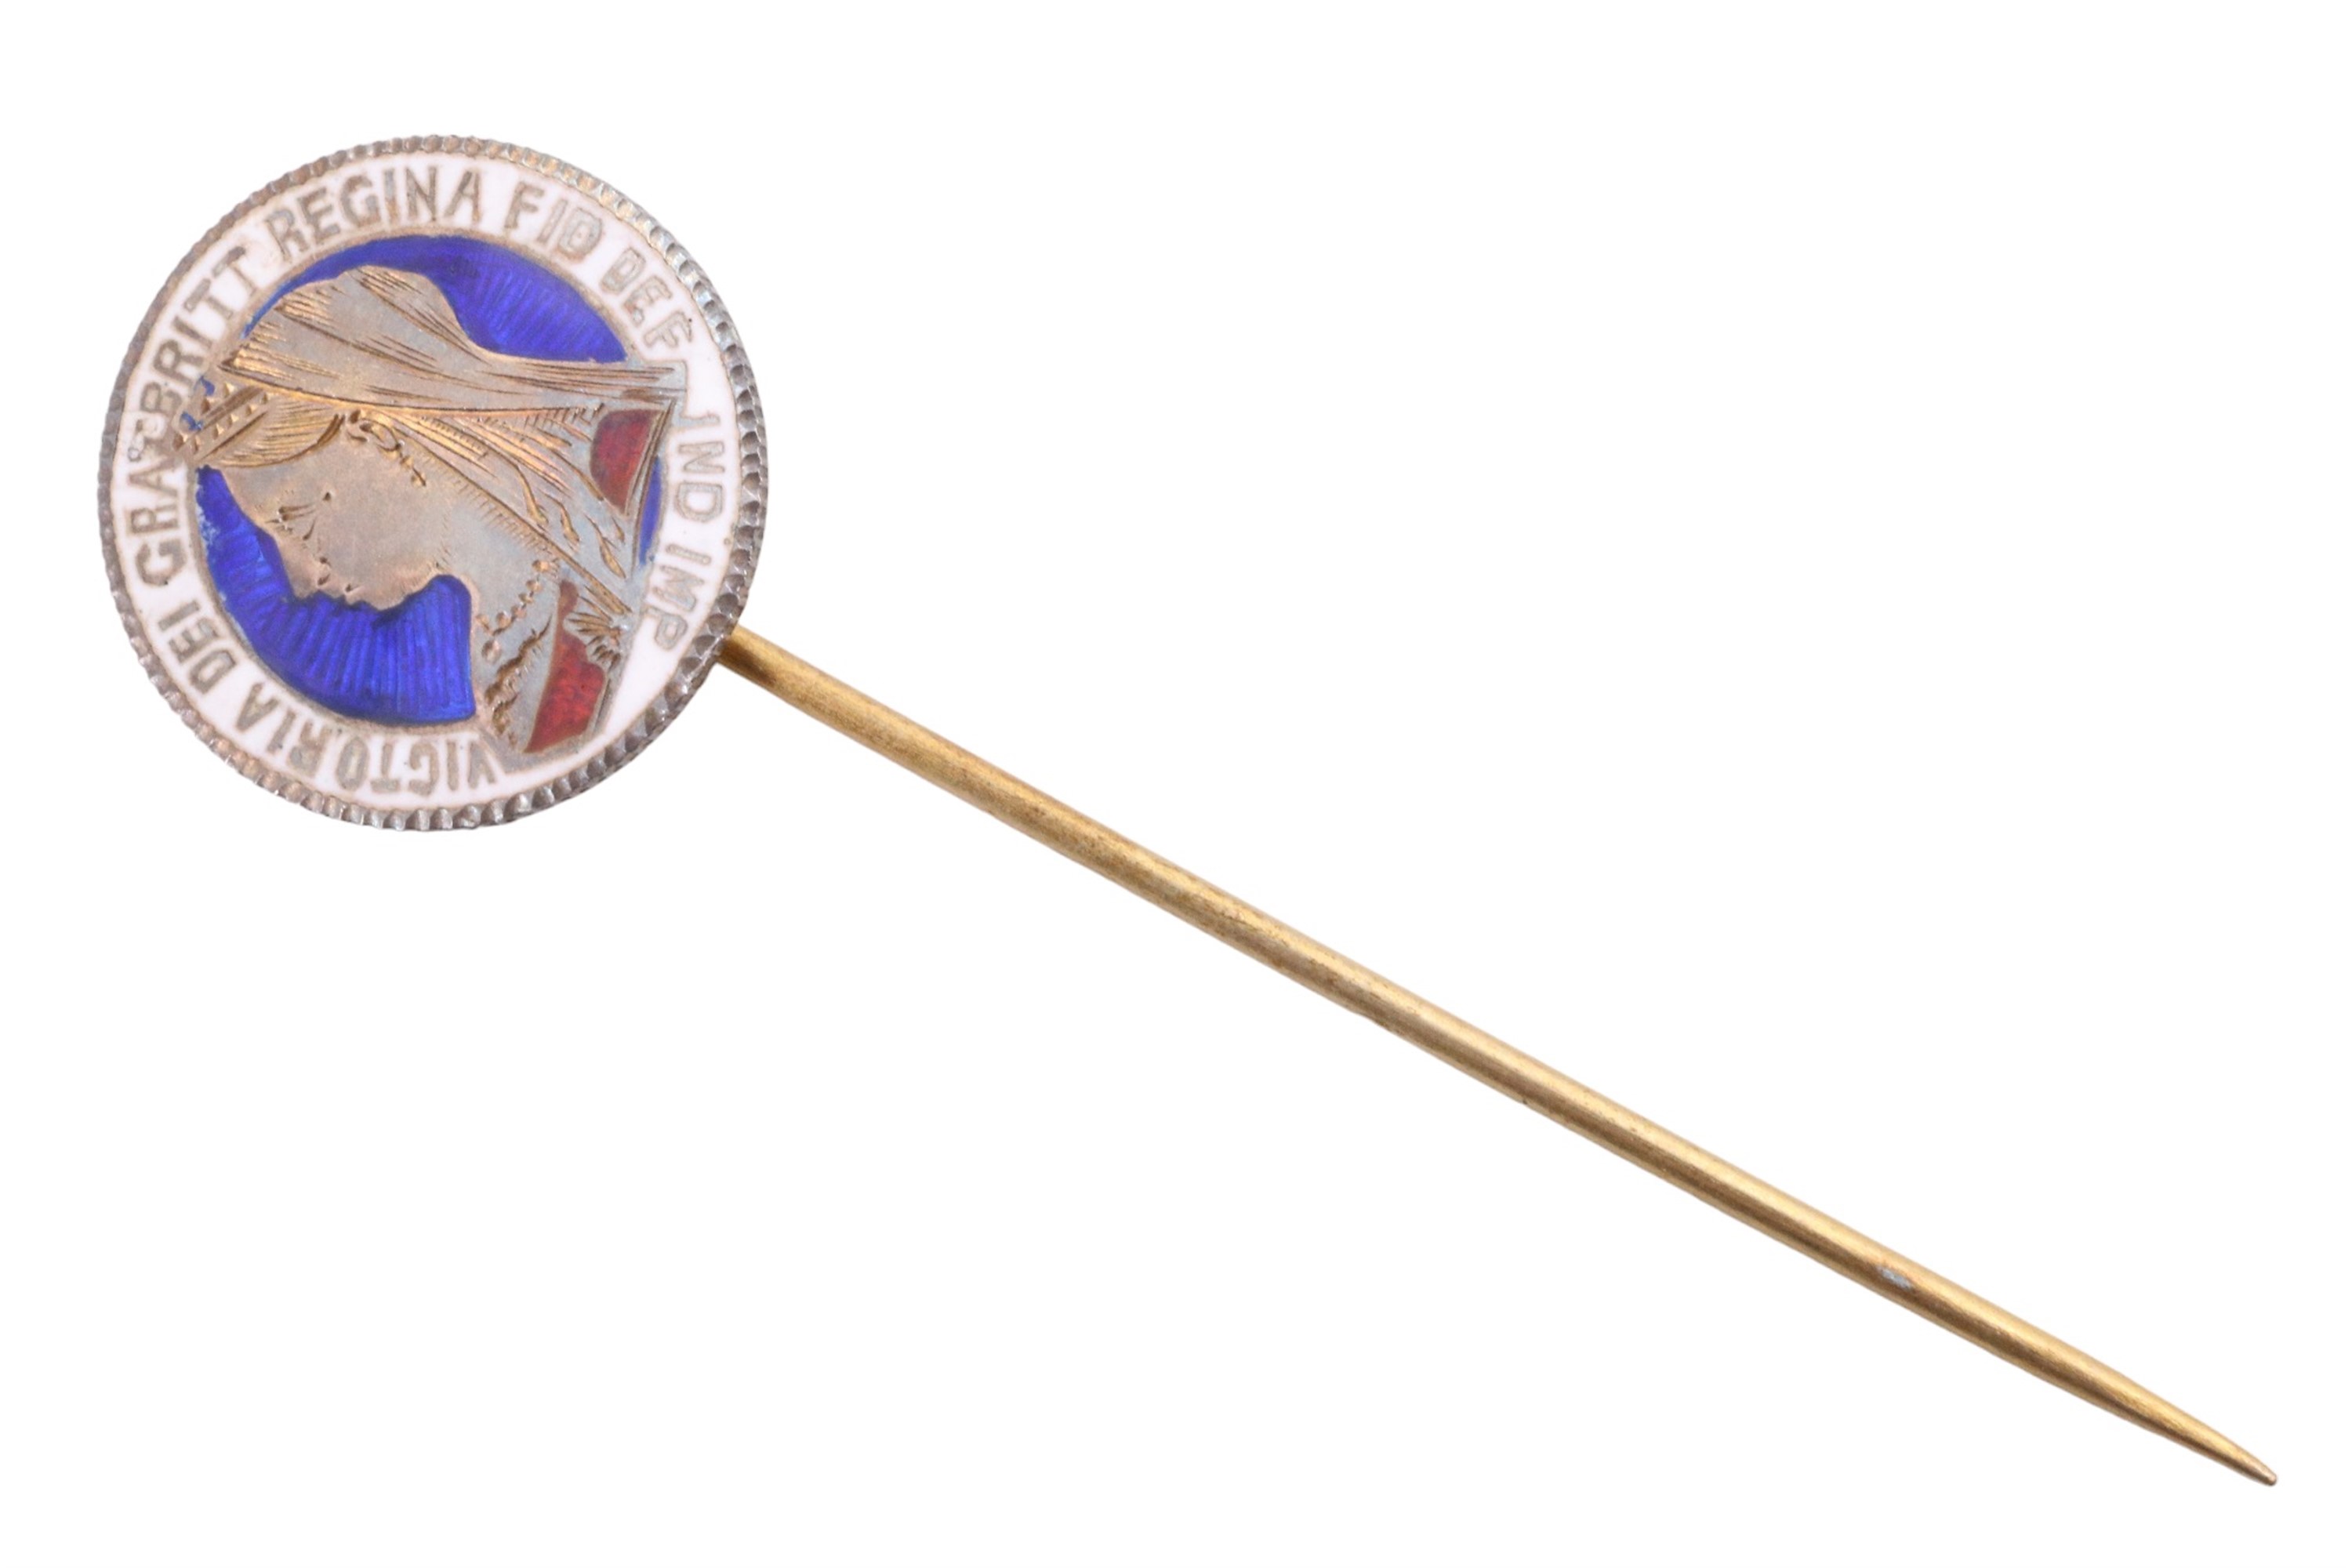 A Victorian enamelled and engraved sixpence coin stick pin